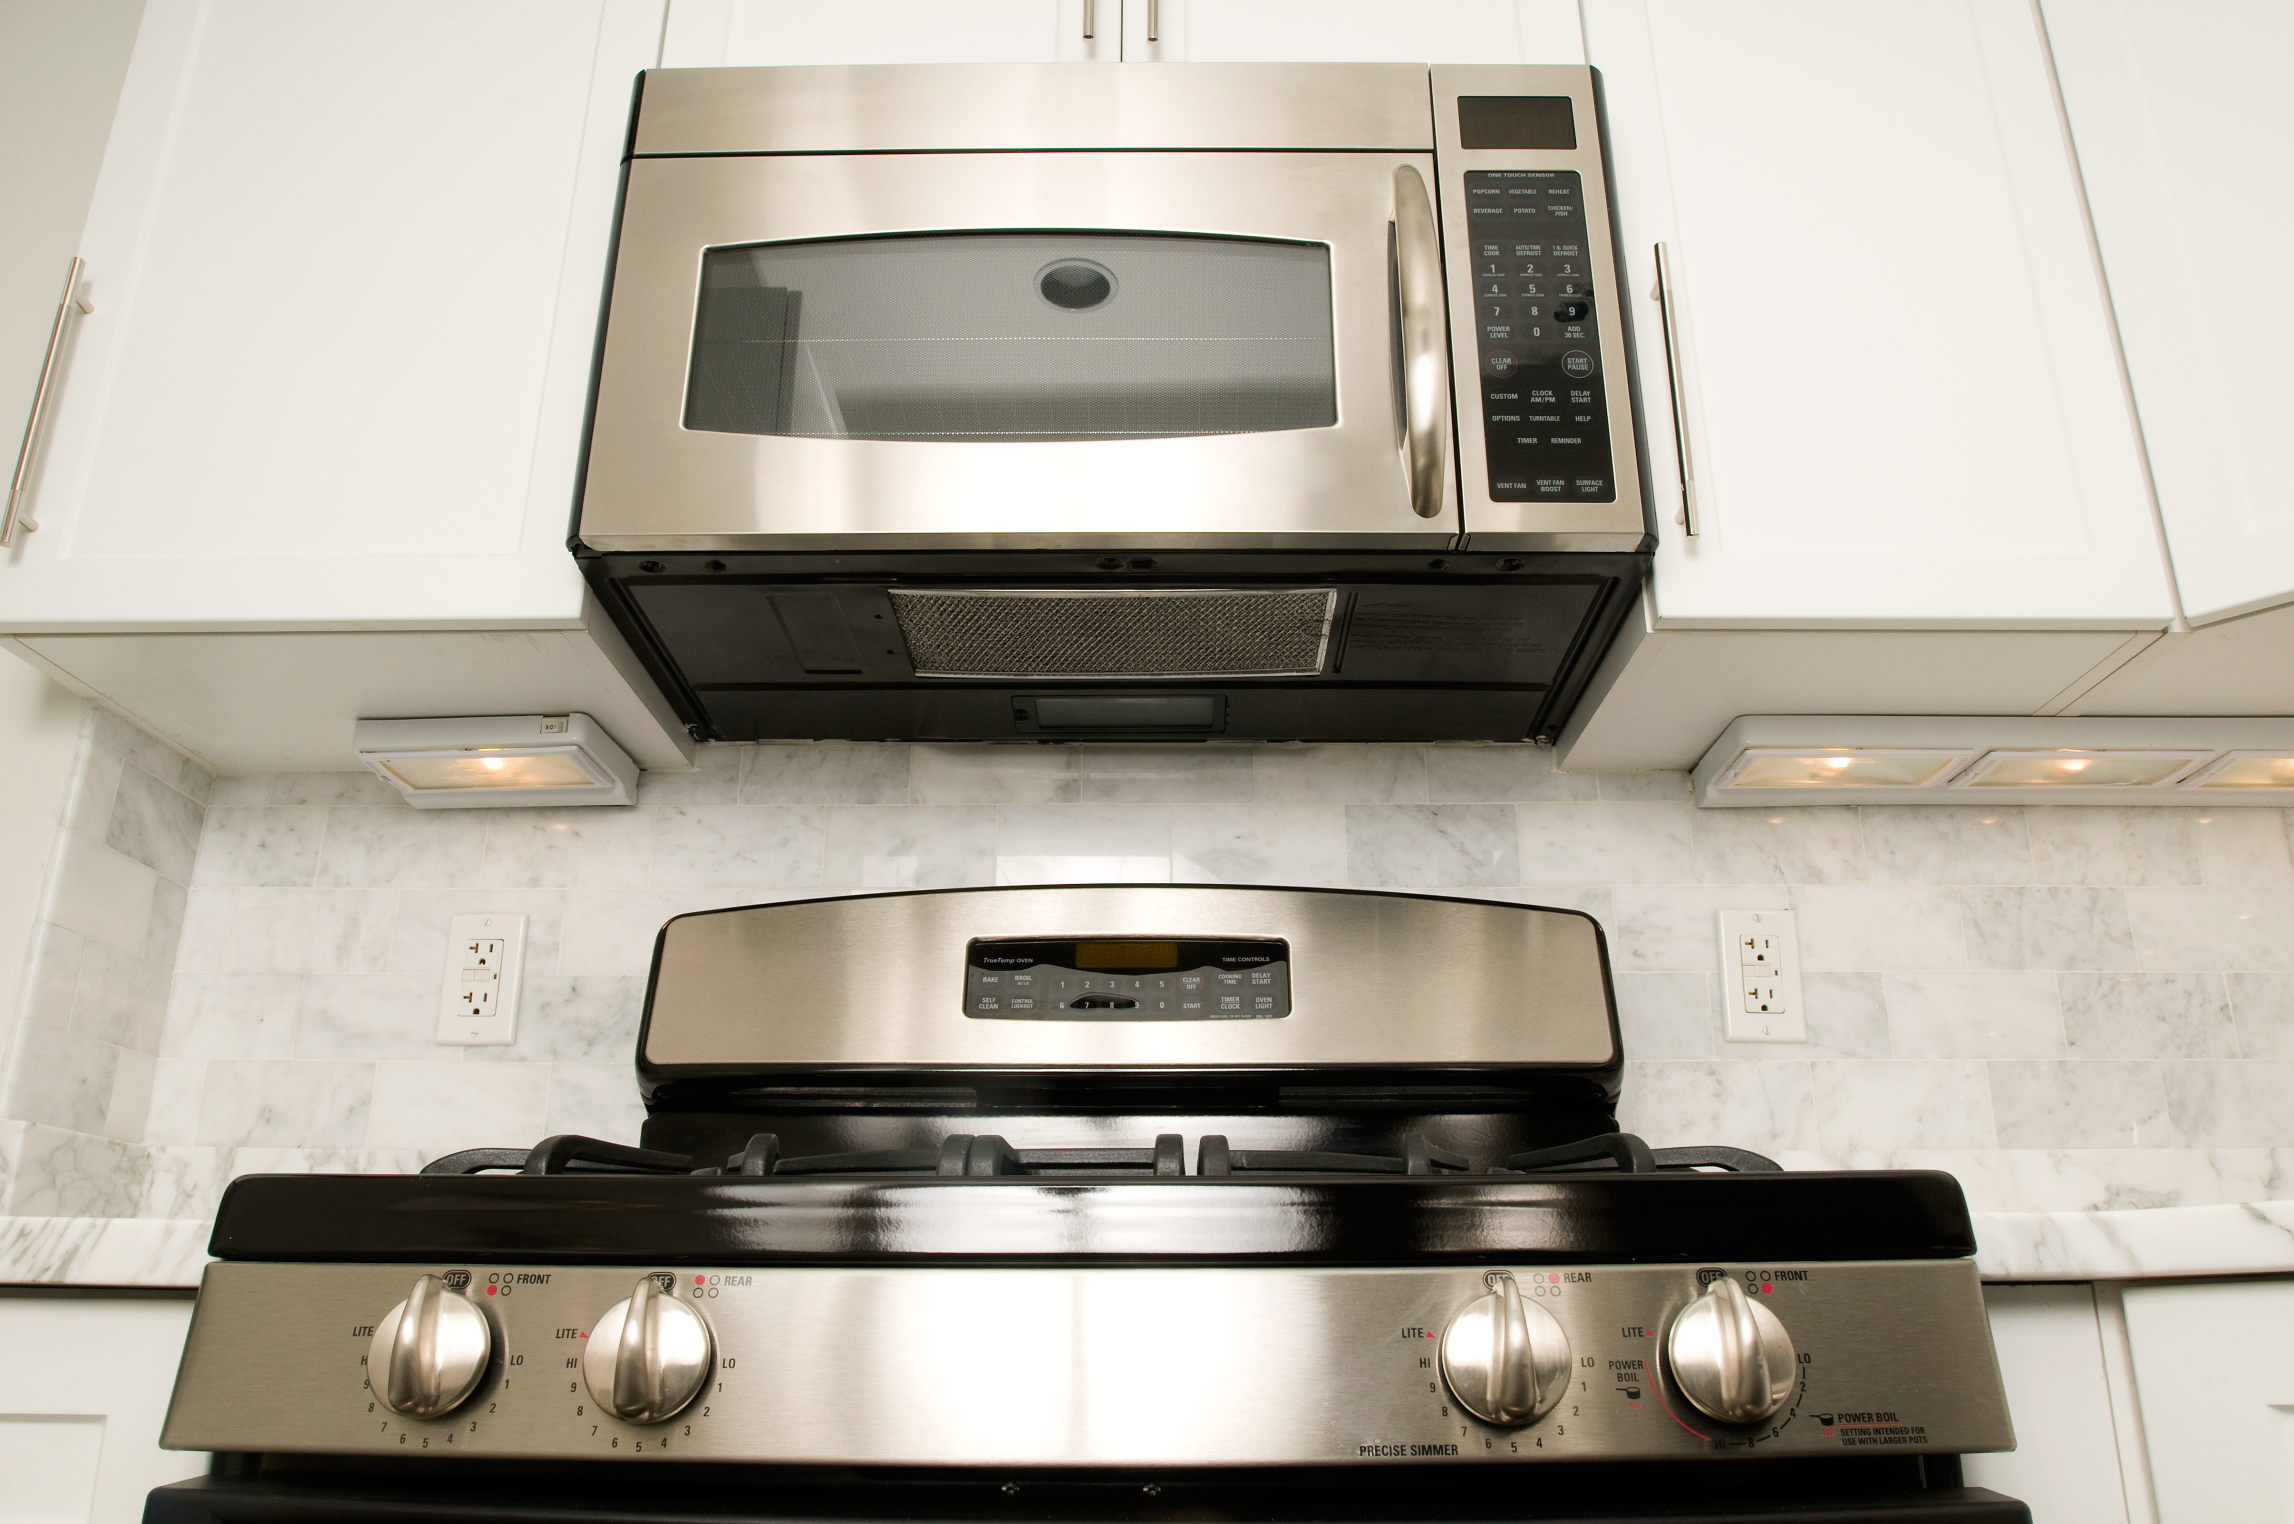 Should I purchase a vent hood or microwave vent hood?